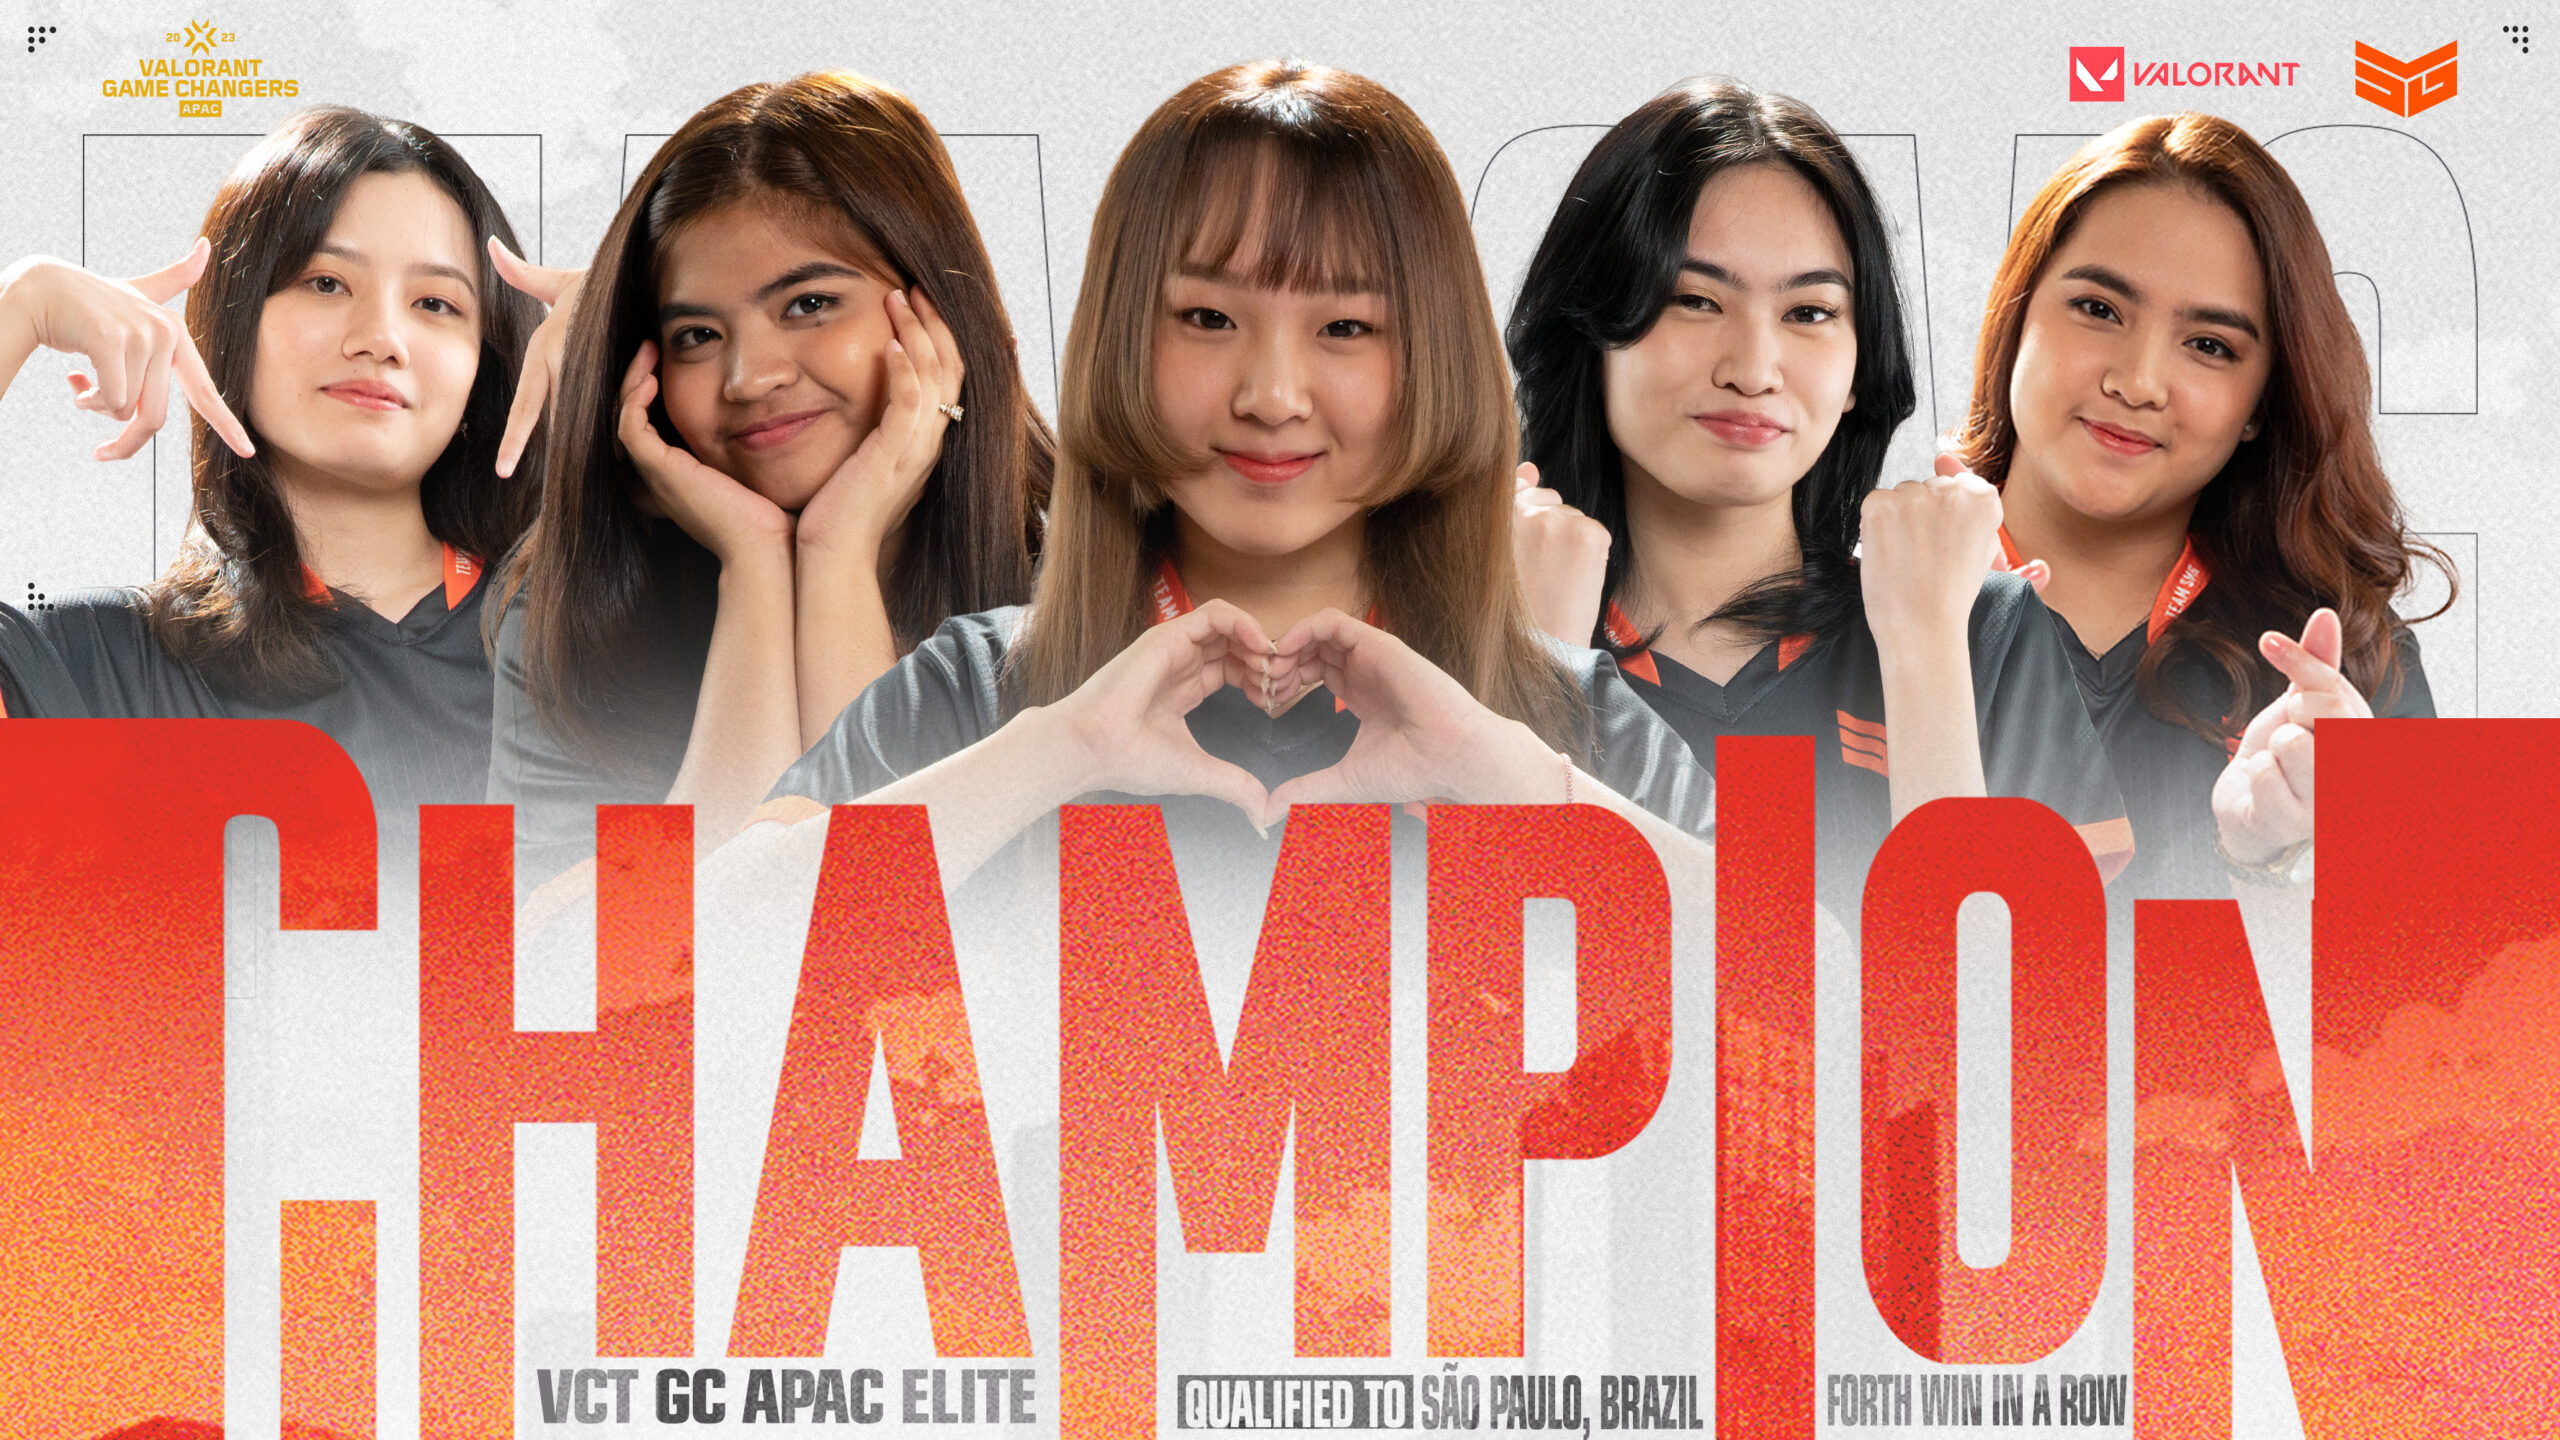 VCT 2023: Game Changers is Set to Crown the Next Valorant Women’s Champions